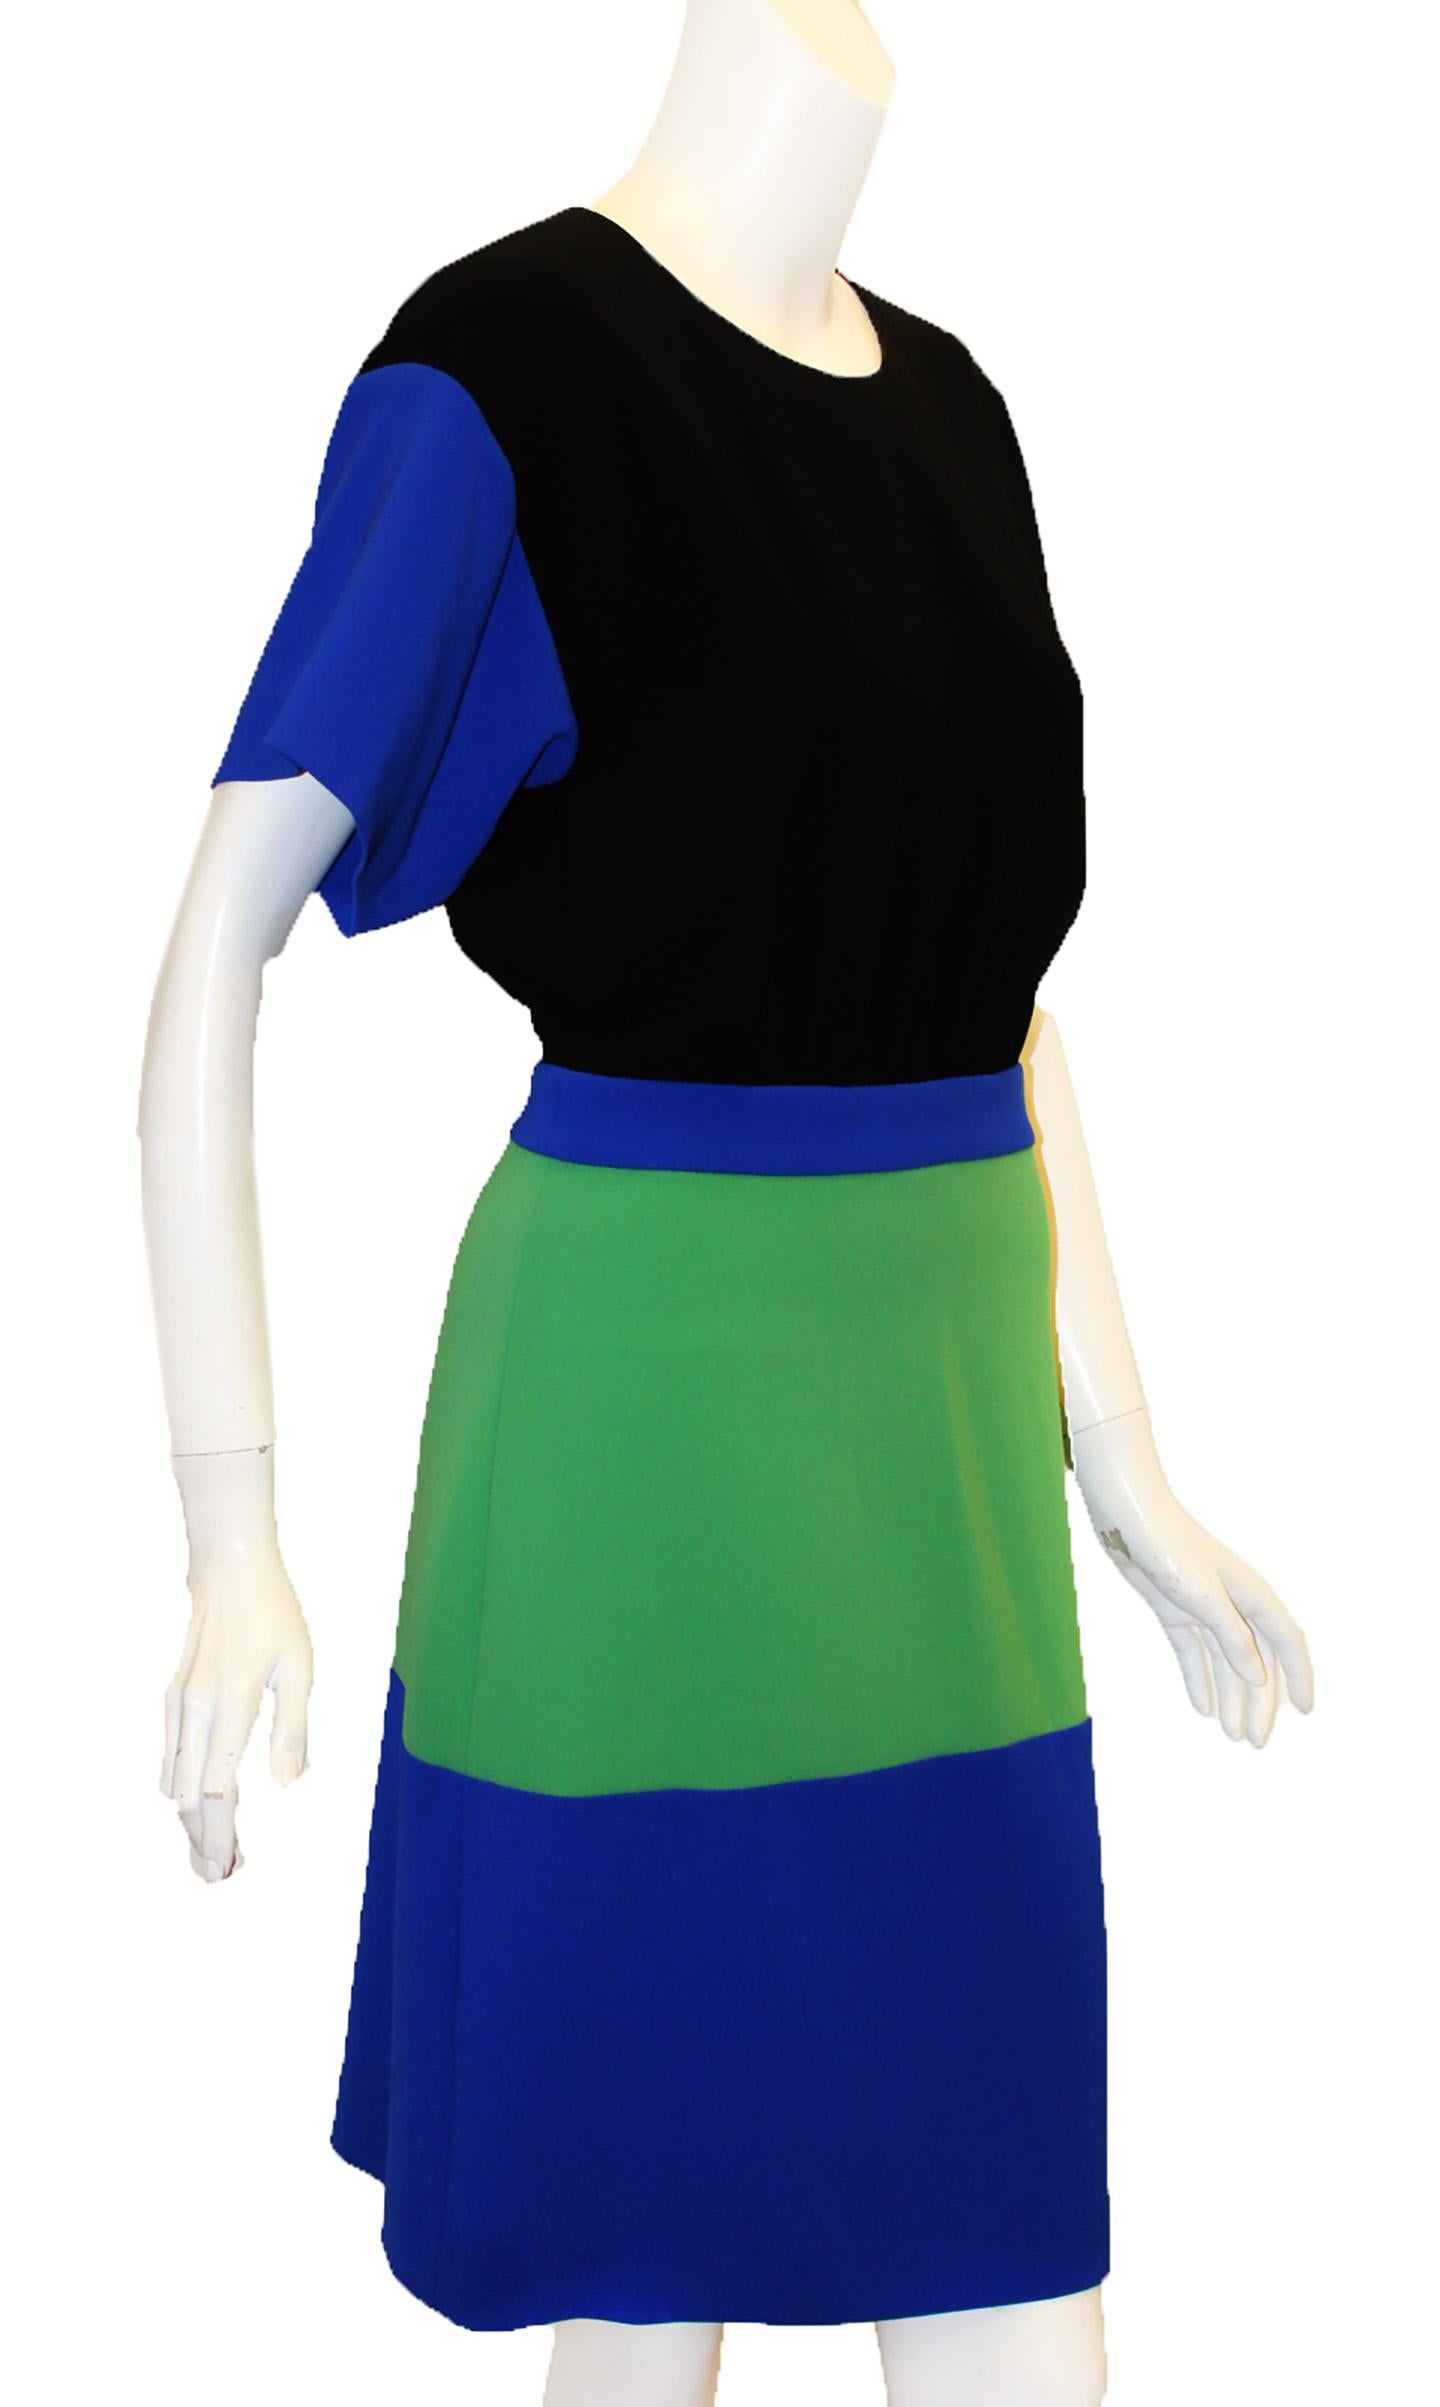 Boutique Moschino color block short sleeve dress incorporates royal blue sleeves, waist band and wide hem.  Dress includes black  bodice and wide green band around the hip.  Includes a short back zipper and a side zipper and snaps.  Dress is not